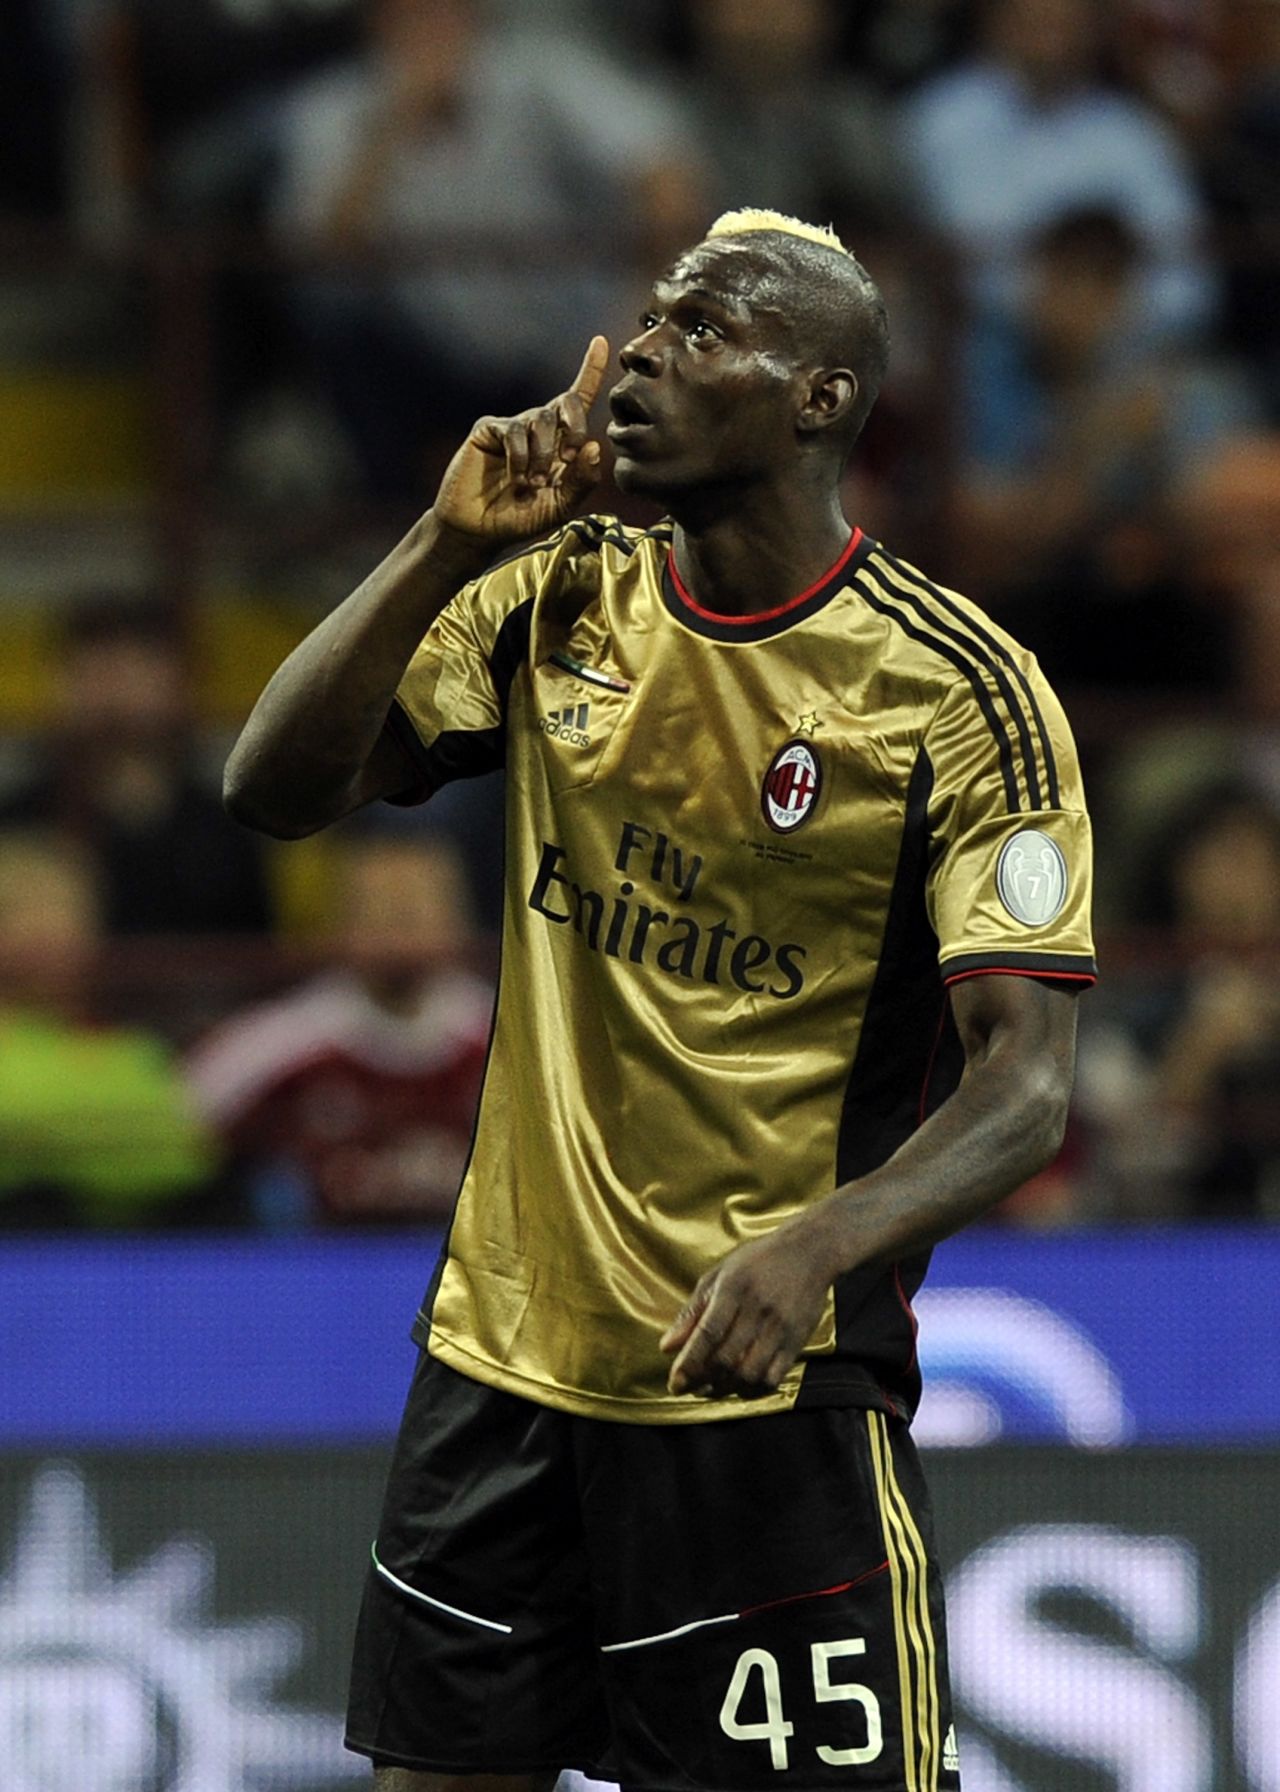 AC Milan, who can boast star names like Italy striker Mario Balotelli among their ranks, dropped two places to tenth in Deloitte's list after a modest rise in revenue saw them record $357m overall.